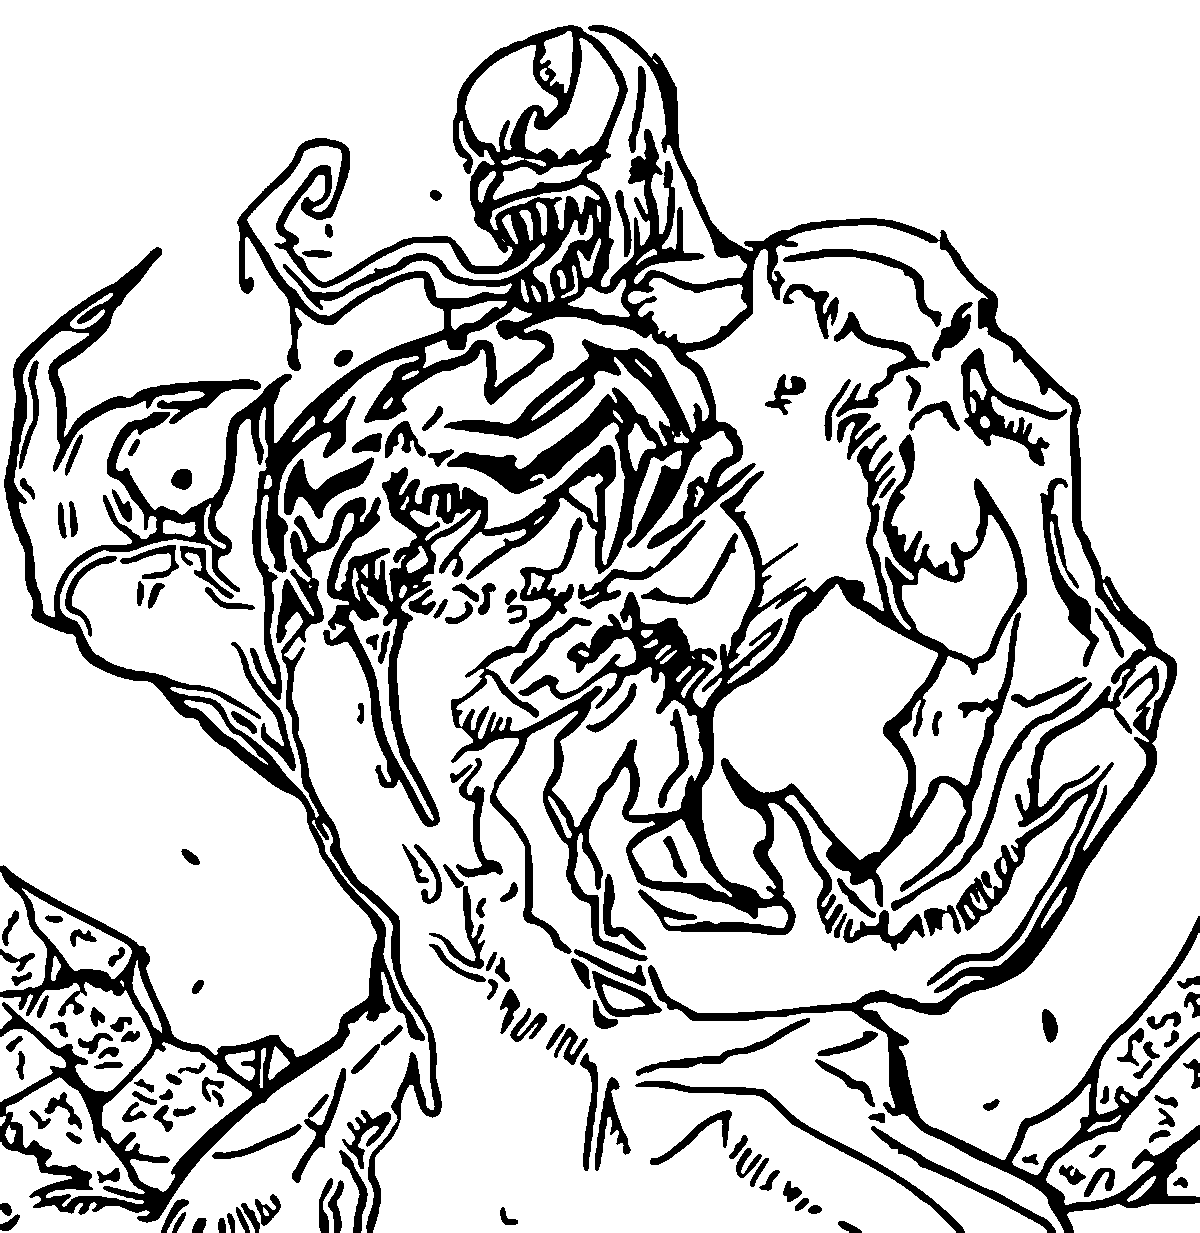 Free Coloring Pages Venom, Download Free Coloring Pages Venom png